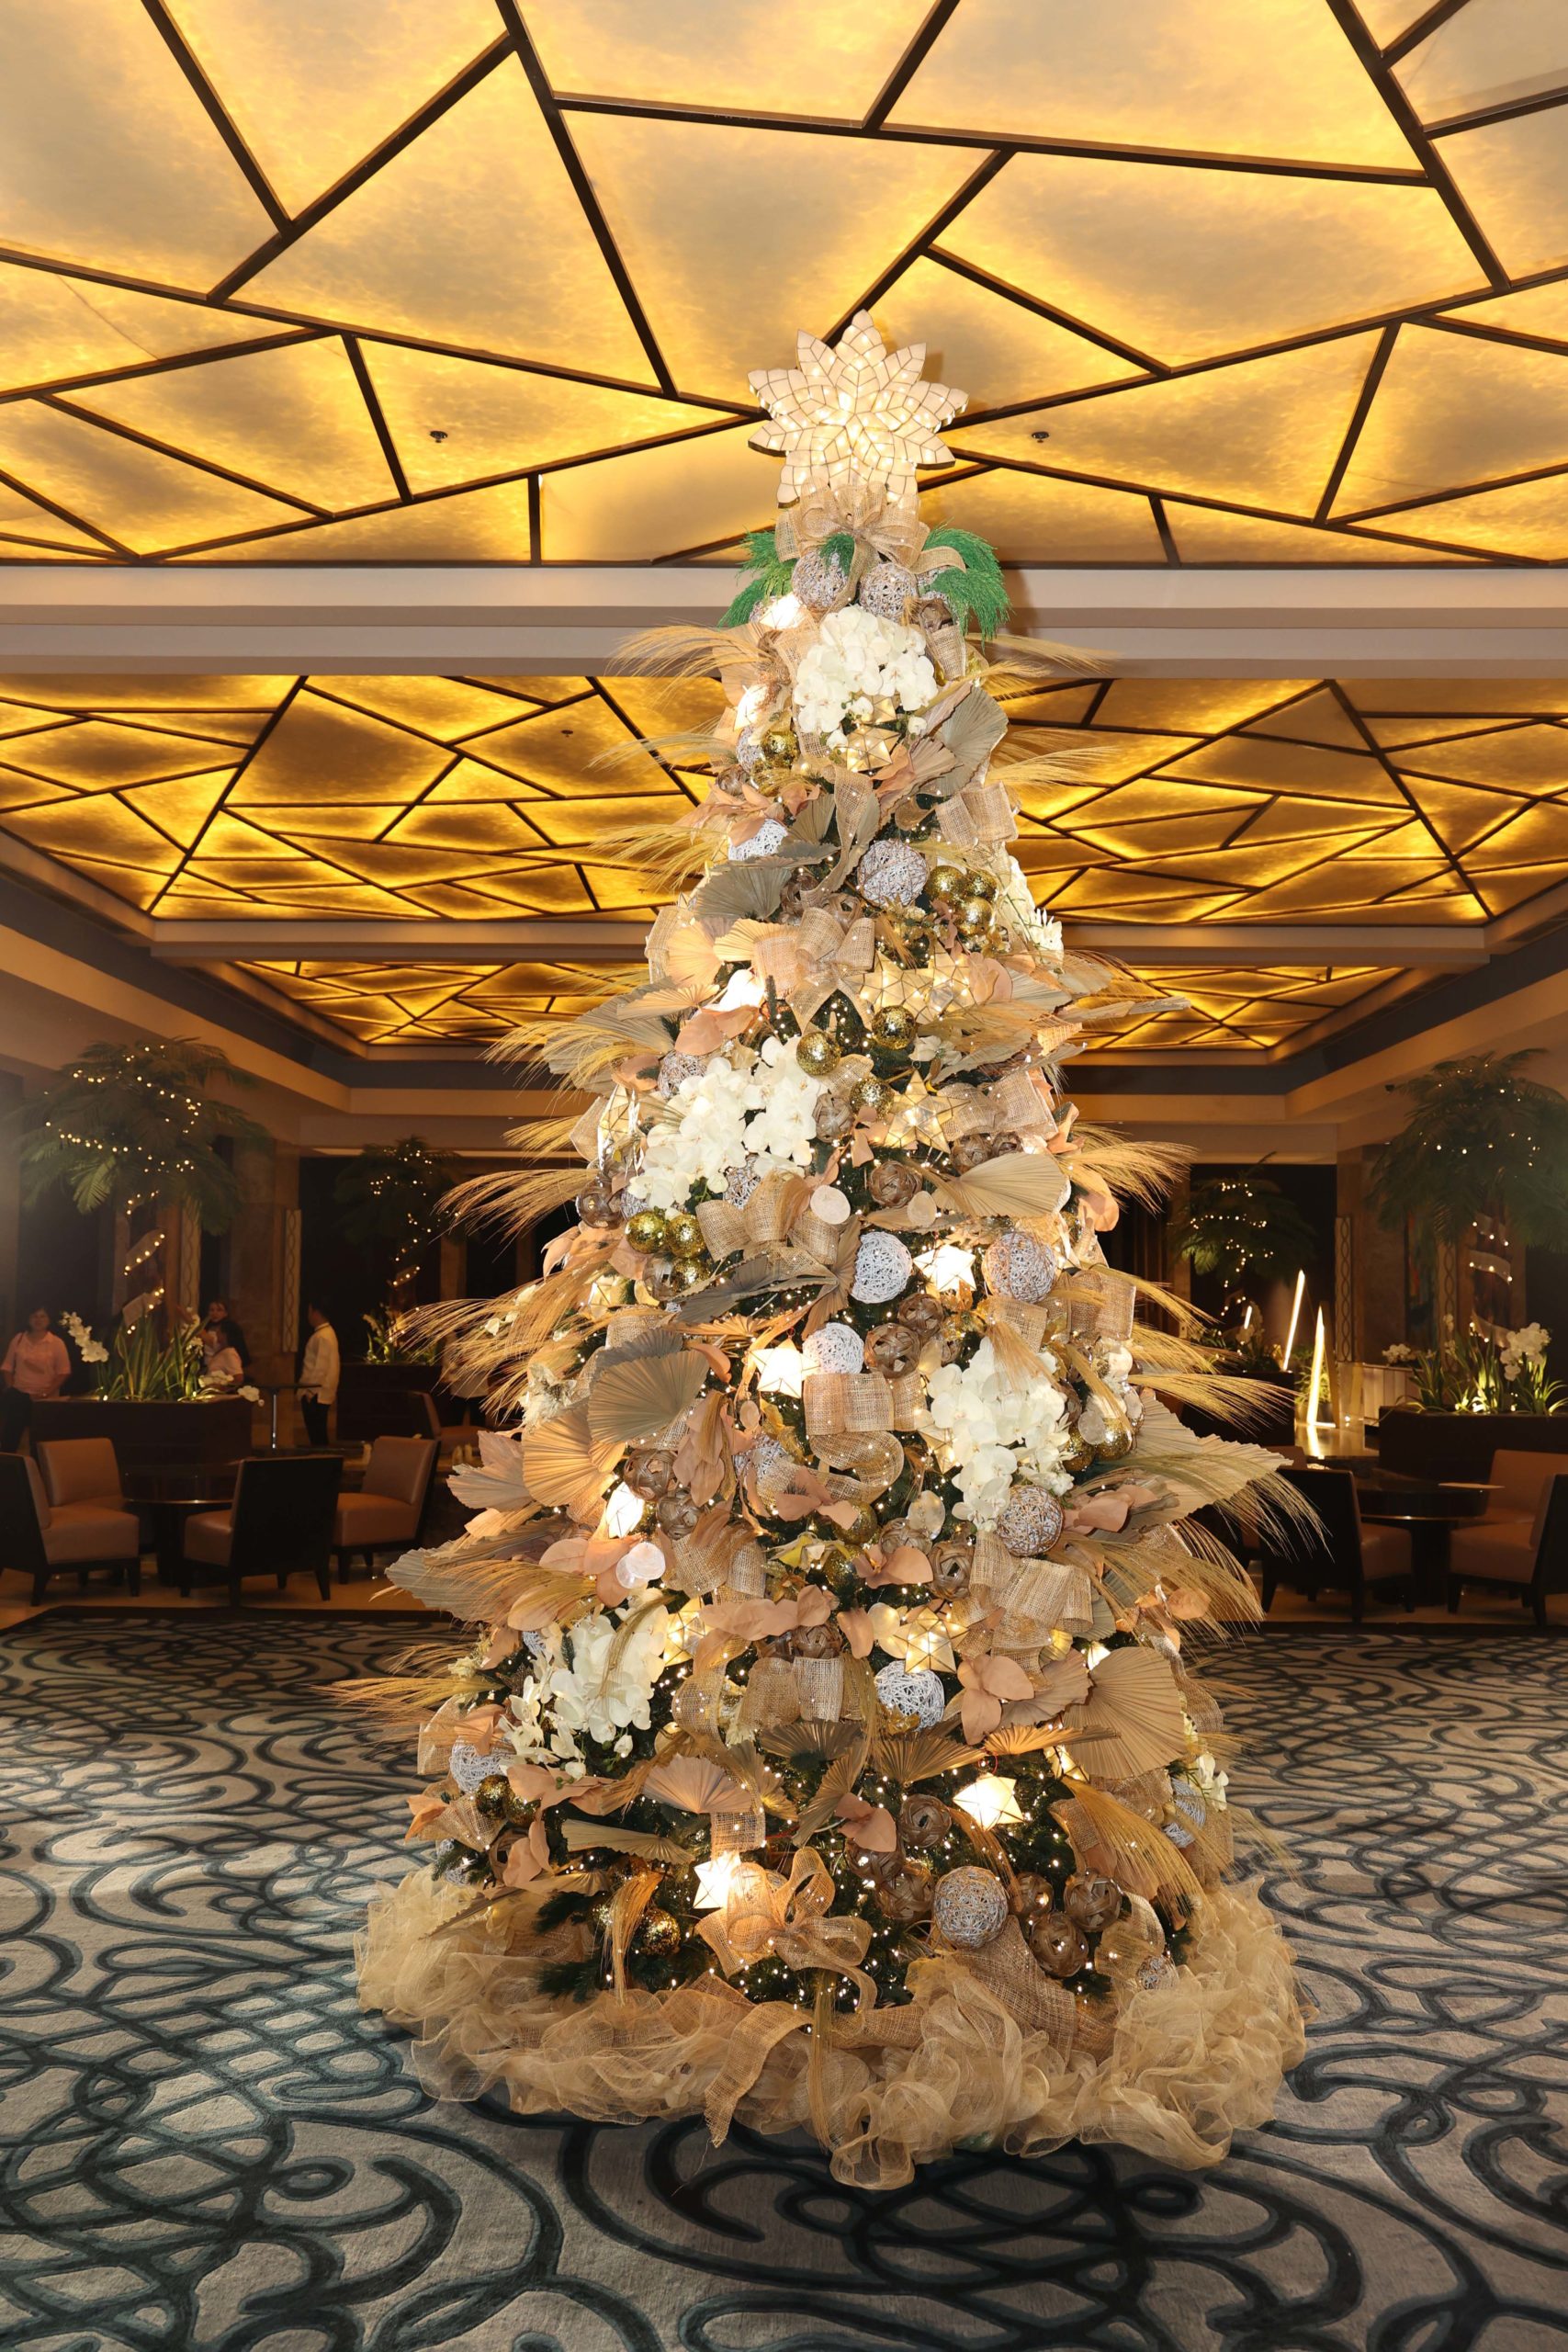 Christmas tree festooned with sinamay streamers capiz shell ornaments and woven miniatures became the scenic centerpiece at the main lobby of Crimson scaled